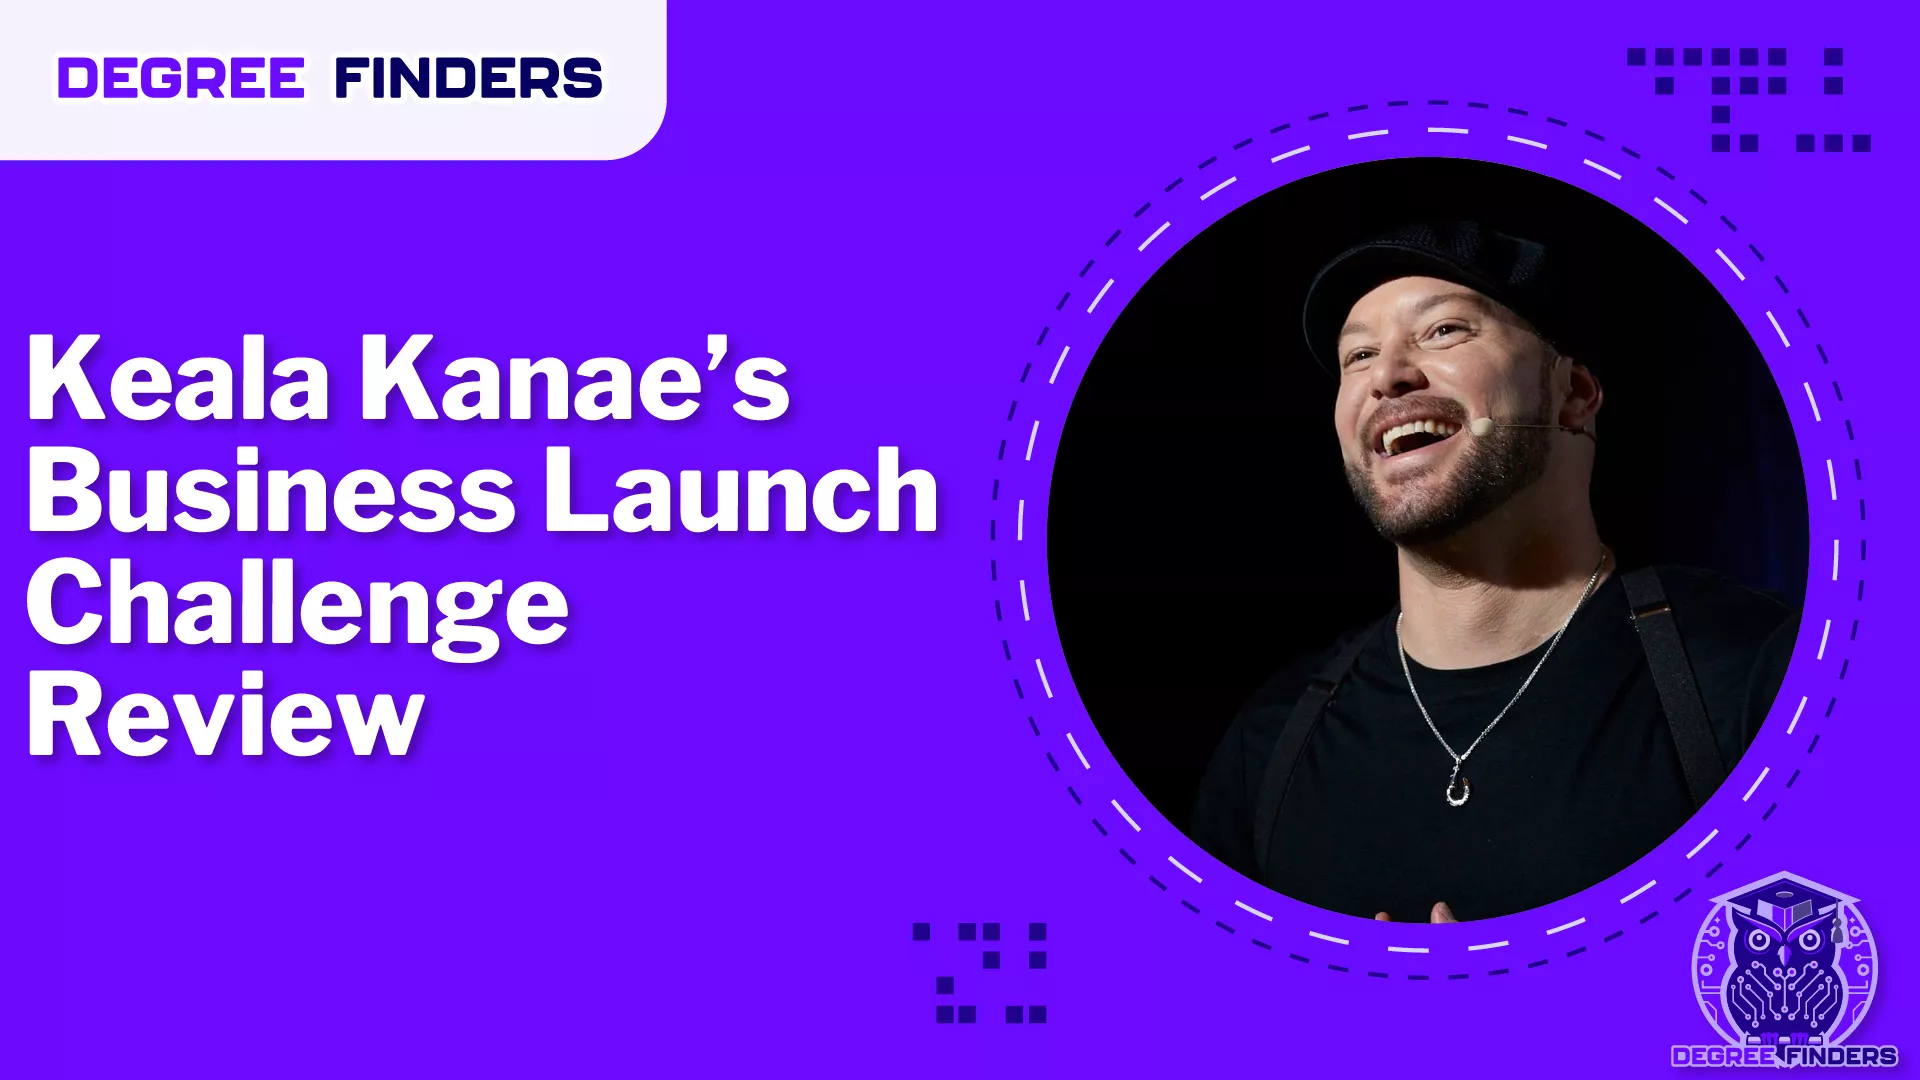 Keala Kanae’s Business Launch Challenge Review